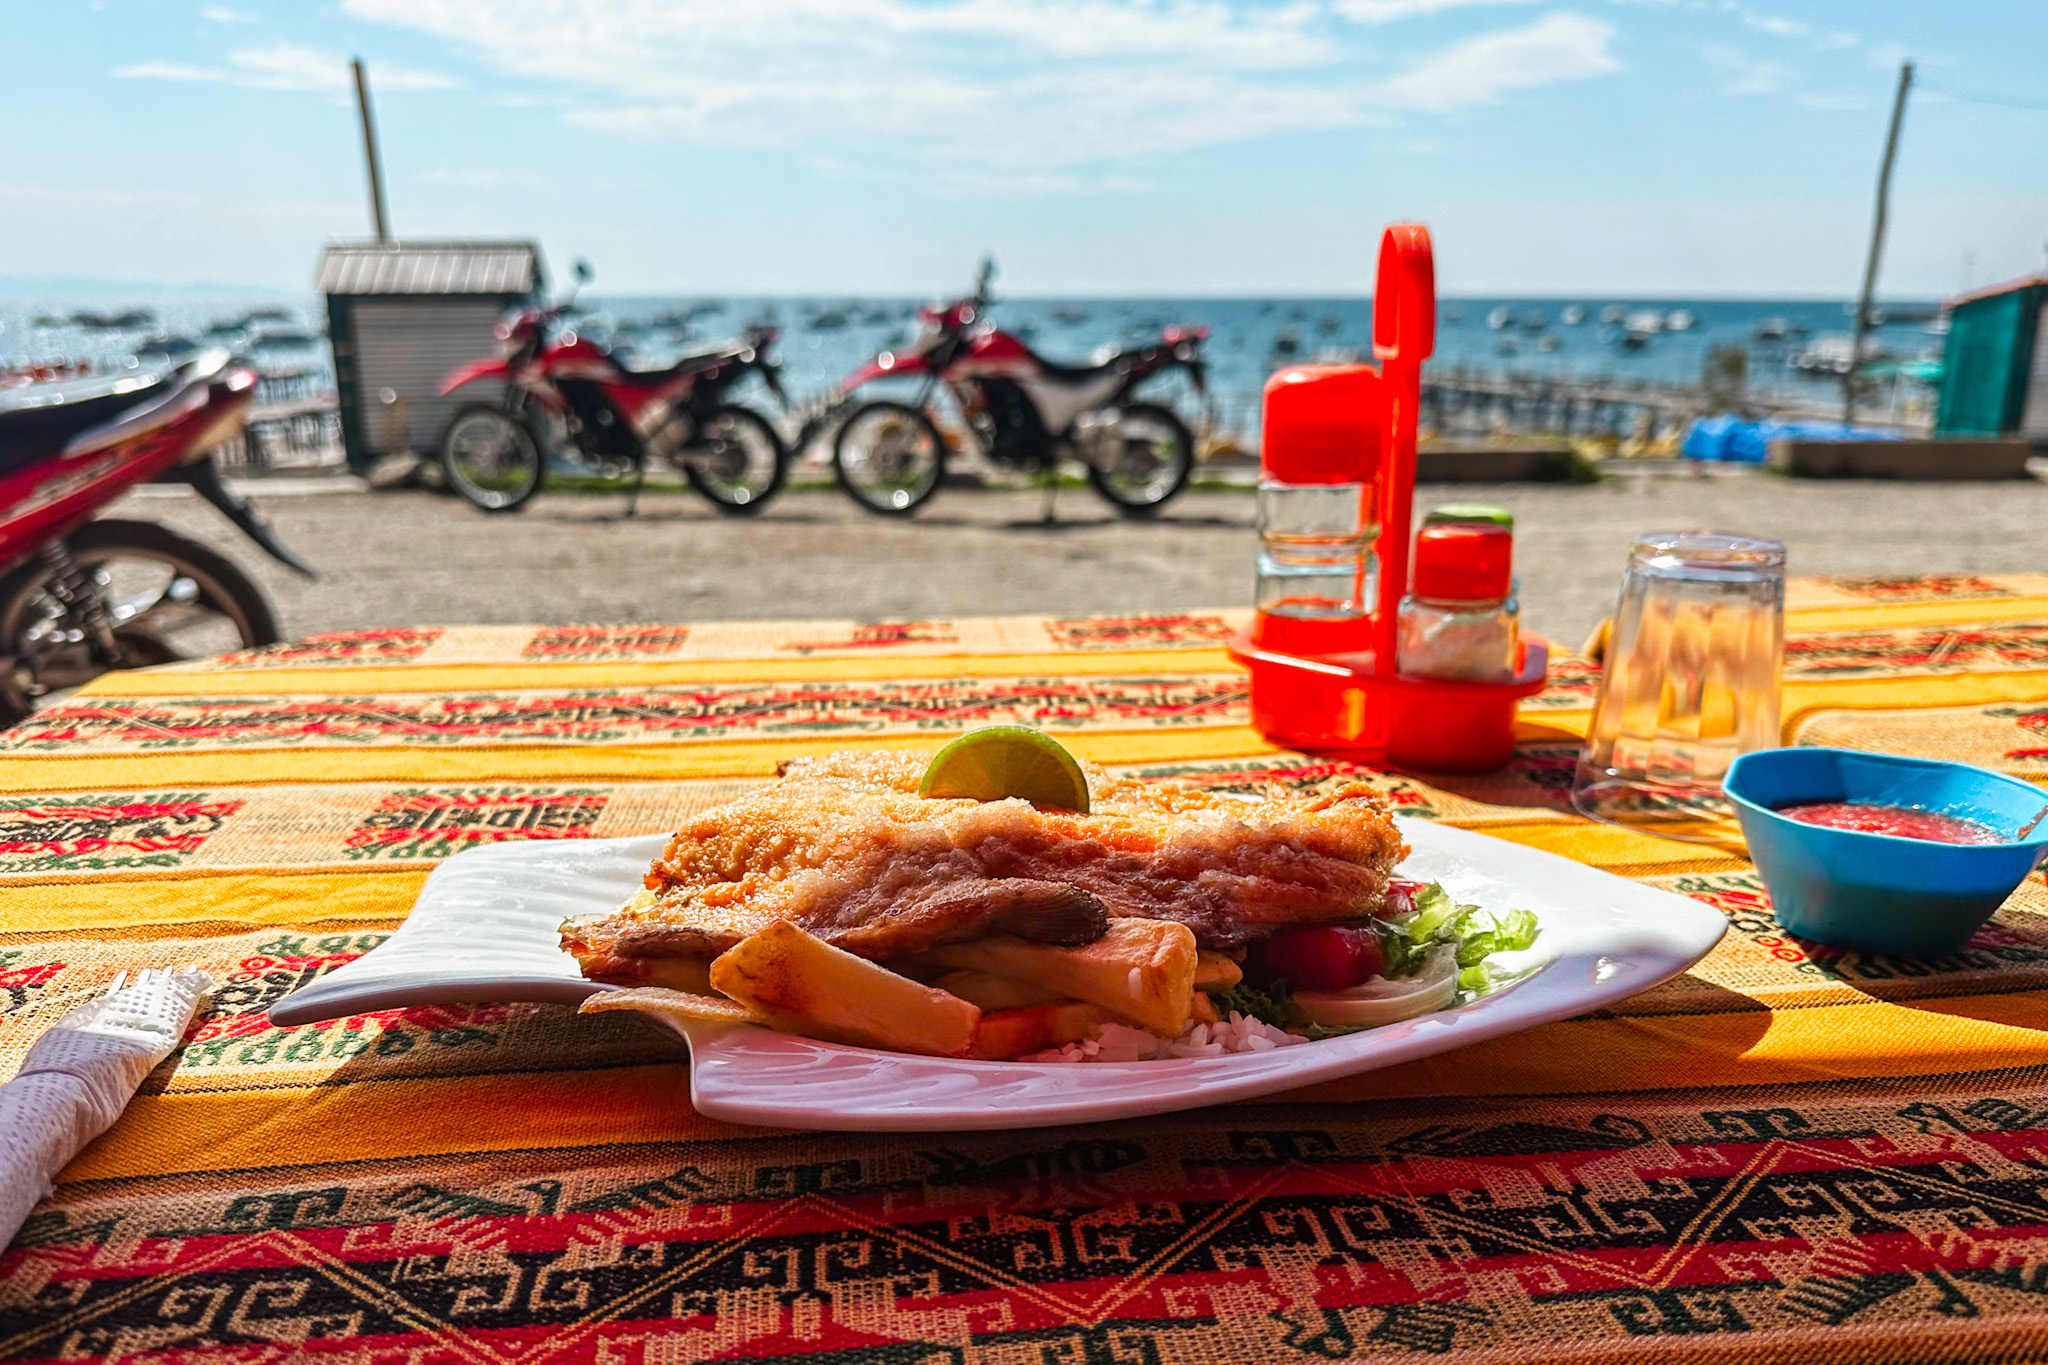 Best Things to Do in Copacabana - Garlic Trout in Kiosk Restaurant at the Copacabana Beach in Bolivia